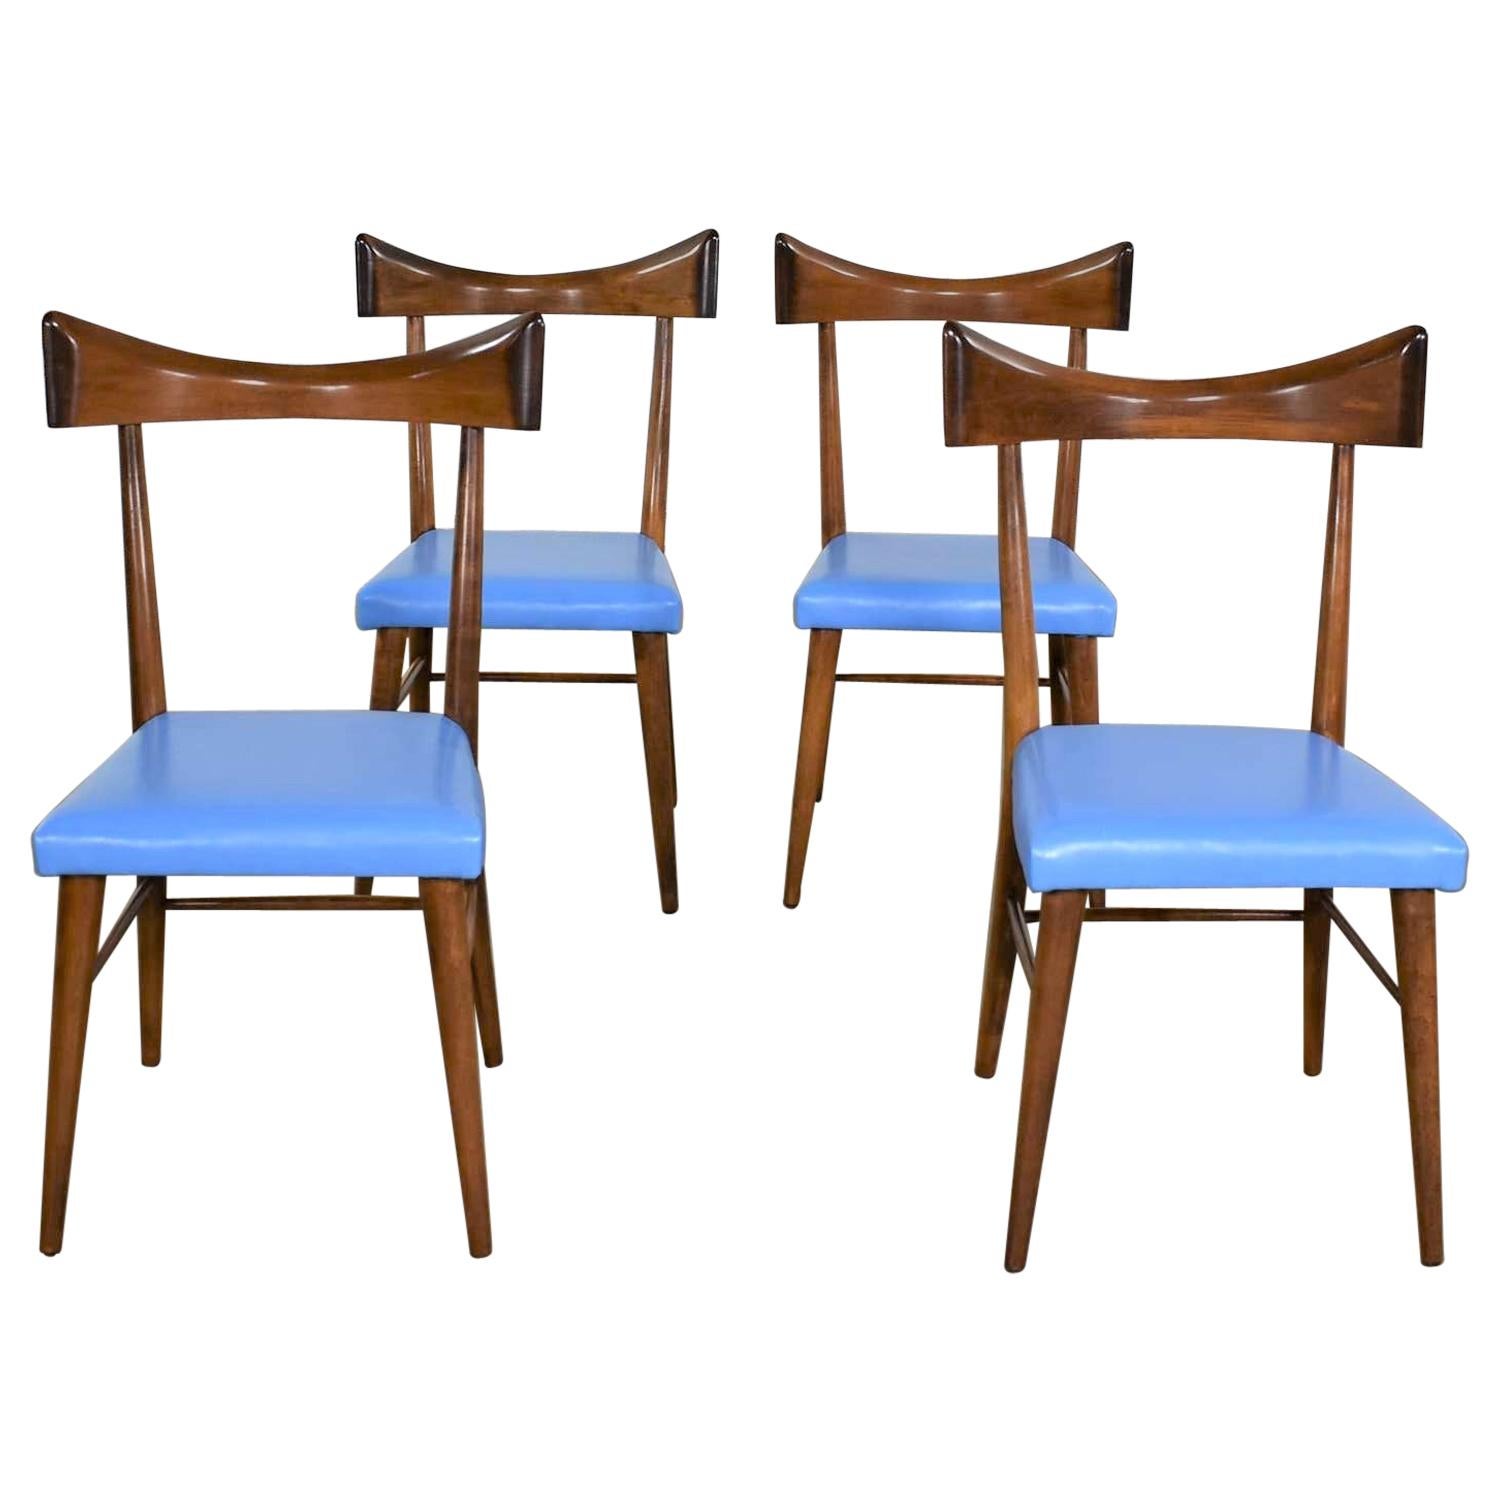 Set 4 Mid-Century Modern Paul McCobb Planner Group Dining Chairs for Winchendon